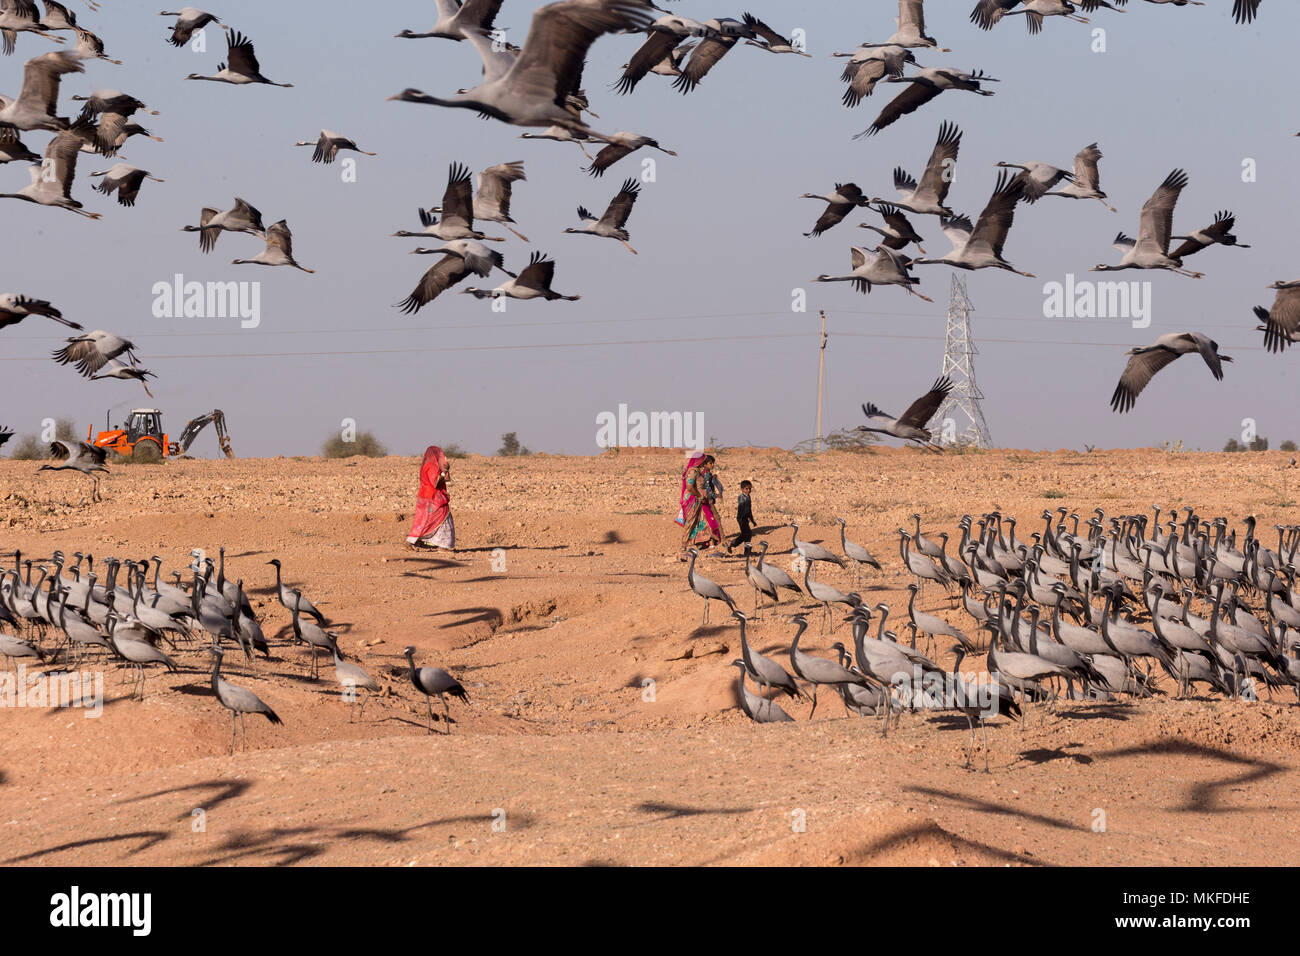 Demoiselle Crane (Anthropoides virgo) human activities (agricultural or otherwise) persist and may temporarily disrupt birds. Kichan, a village in the Marwari Jain community, whose inhabitants feed every winter since 1970, the wintering Cranes, Thar Desert, Rajasthan, India Stock Photo